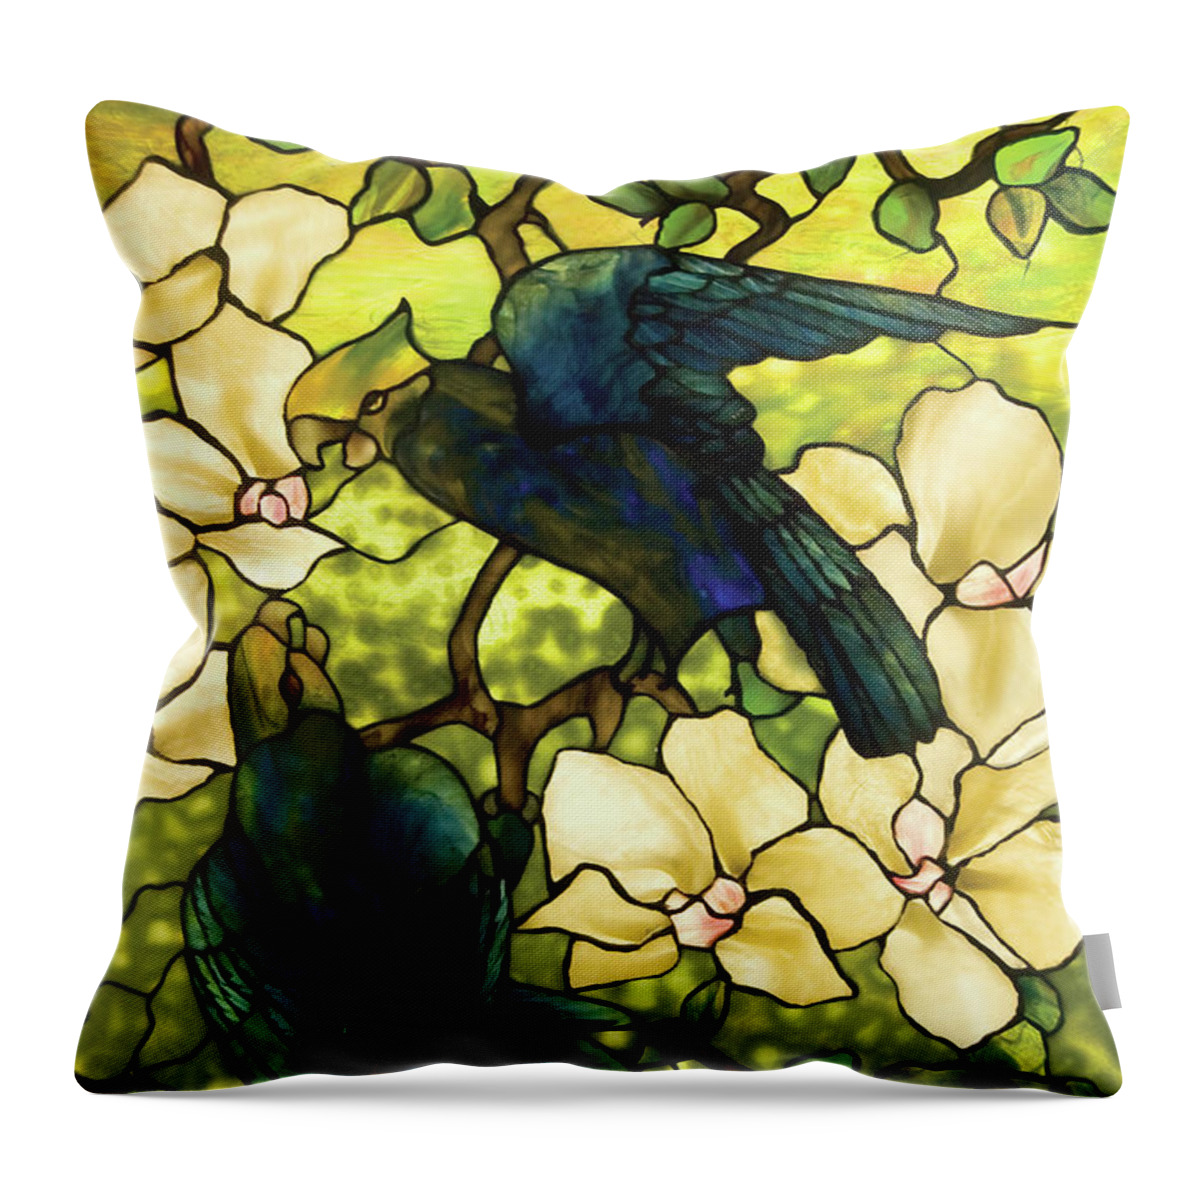 Glass Throw Pillow featuring the painting Hibiscus & Parrots by Louis Comfort Tiffany